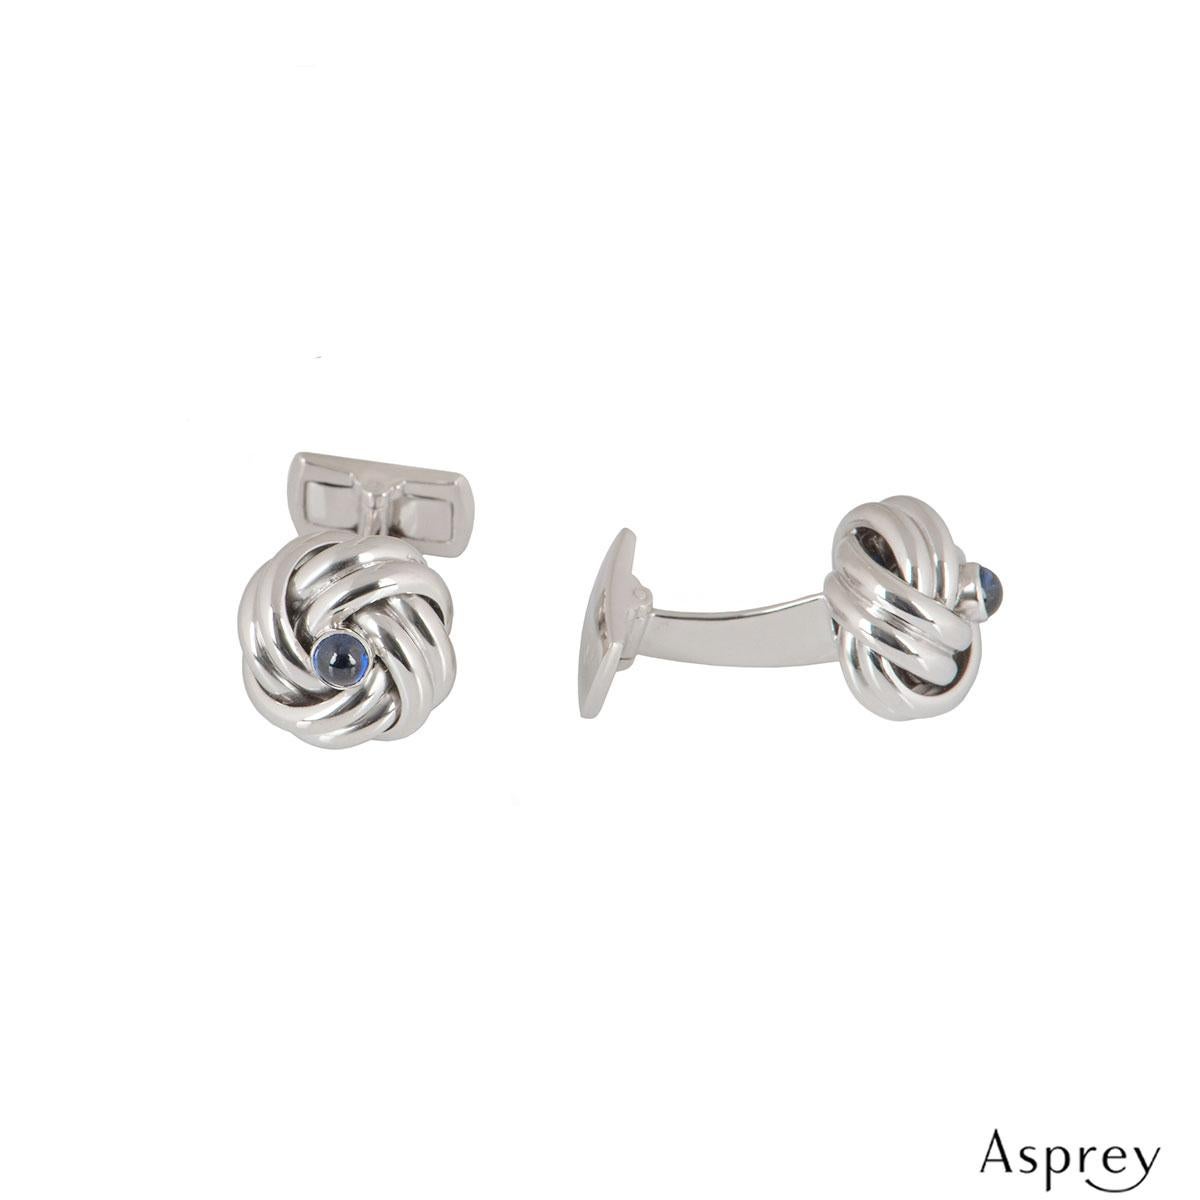 An 18k white gold pair of Asprey cufflinks. The cufflinks have a knot design set with a cabochon cut sapphire in the middle with an approximate total weight of 0.24ct. The cufflinks feature t-bar fittings with a length of 2.50cm. The knot measures